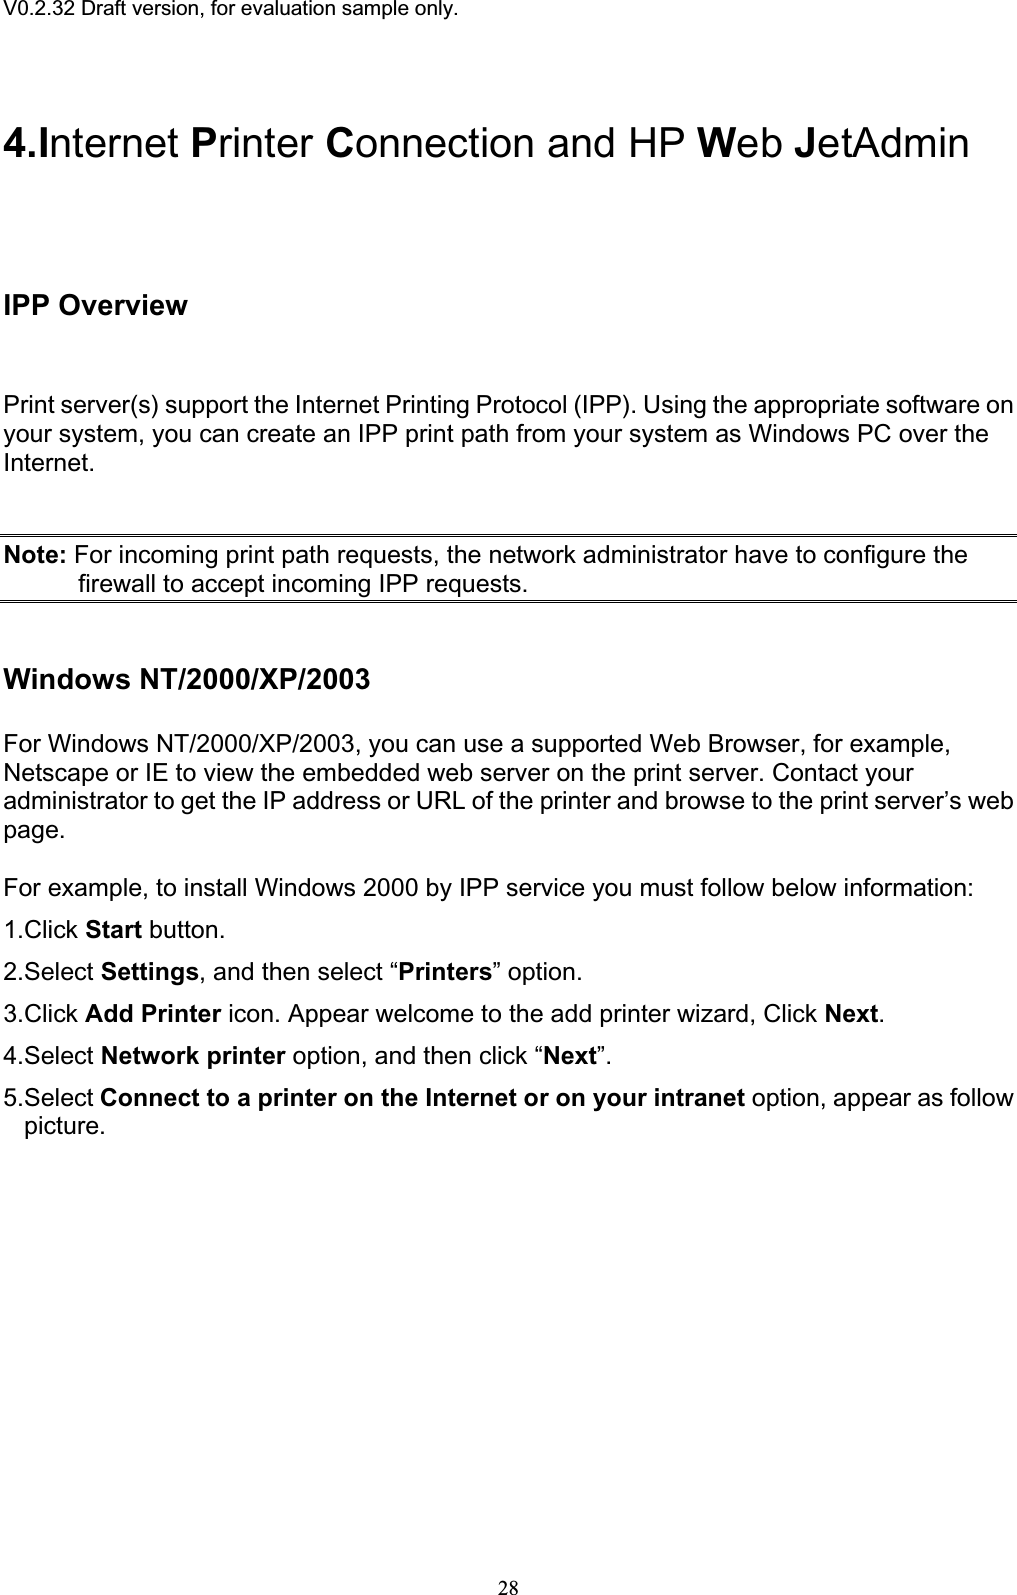 V0.2.32 Draft version, for evaluation sample only.4.Internet Printer Connection and HP Web JetAdminIPP OverviewPrint server(s) support the Internet Printing Protocol (IPP). Using the appropriate software on your system, you can create an IPP print path from your system as Windows PC over the Internet.Note: For incoming print path requests, the network administrator have to configure the firewall to accept incoming IPP requests. Windows NT/2000/XP/2003 For Windows NT/2000/XP/2003, you can use a supported Web Browser, for example, Netscape or IE to view the embedded web server on the print server. Contact your administrator to get the IP address or URL of the printer and browse to the print server’s web page.For example, to install Windows 2000 by IPP service you must follow below information: 1.Click Start button. 2.Select Settings, and then select “Printers” option. 3.Click Add Printer icon. Appear welcome to the add printer wizard, Click Next.4.Select Network printer option, and then click “Next”.5.Select Connect to a printer on the Internet or on your intranet option, appear as follow picture.28